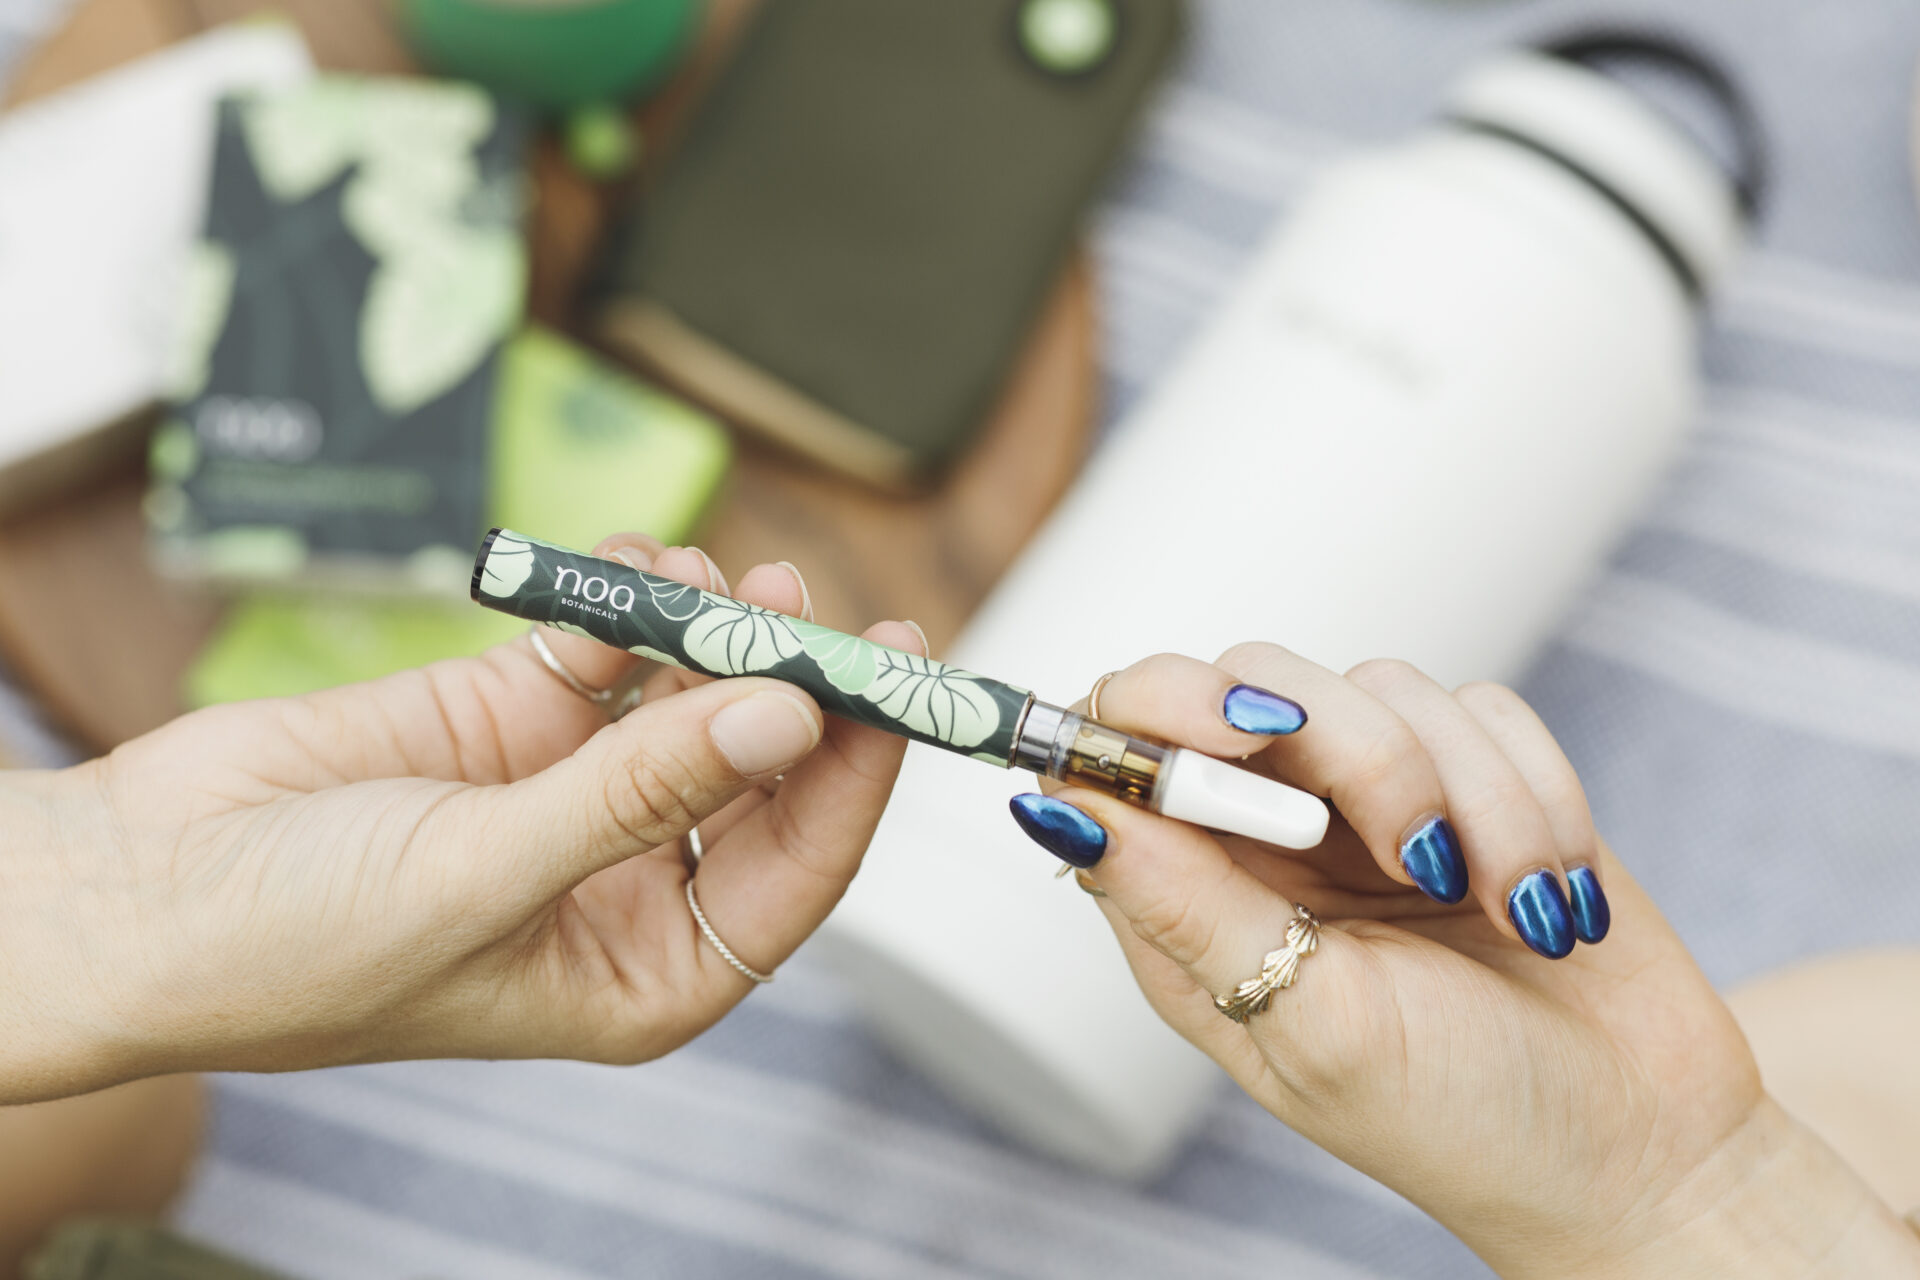 Two individuals engaging in medical cannabis consumption using a CBD vape pen.